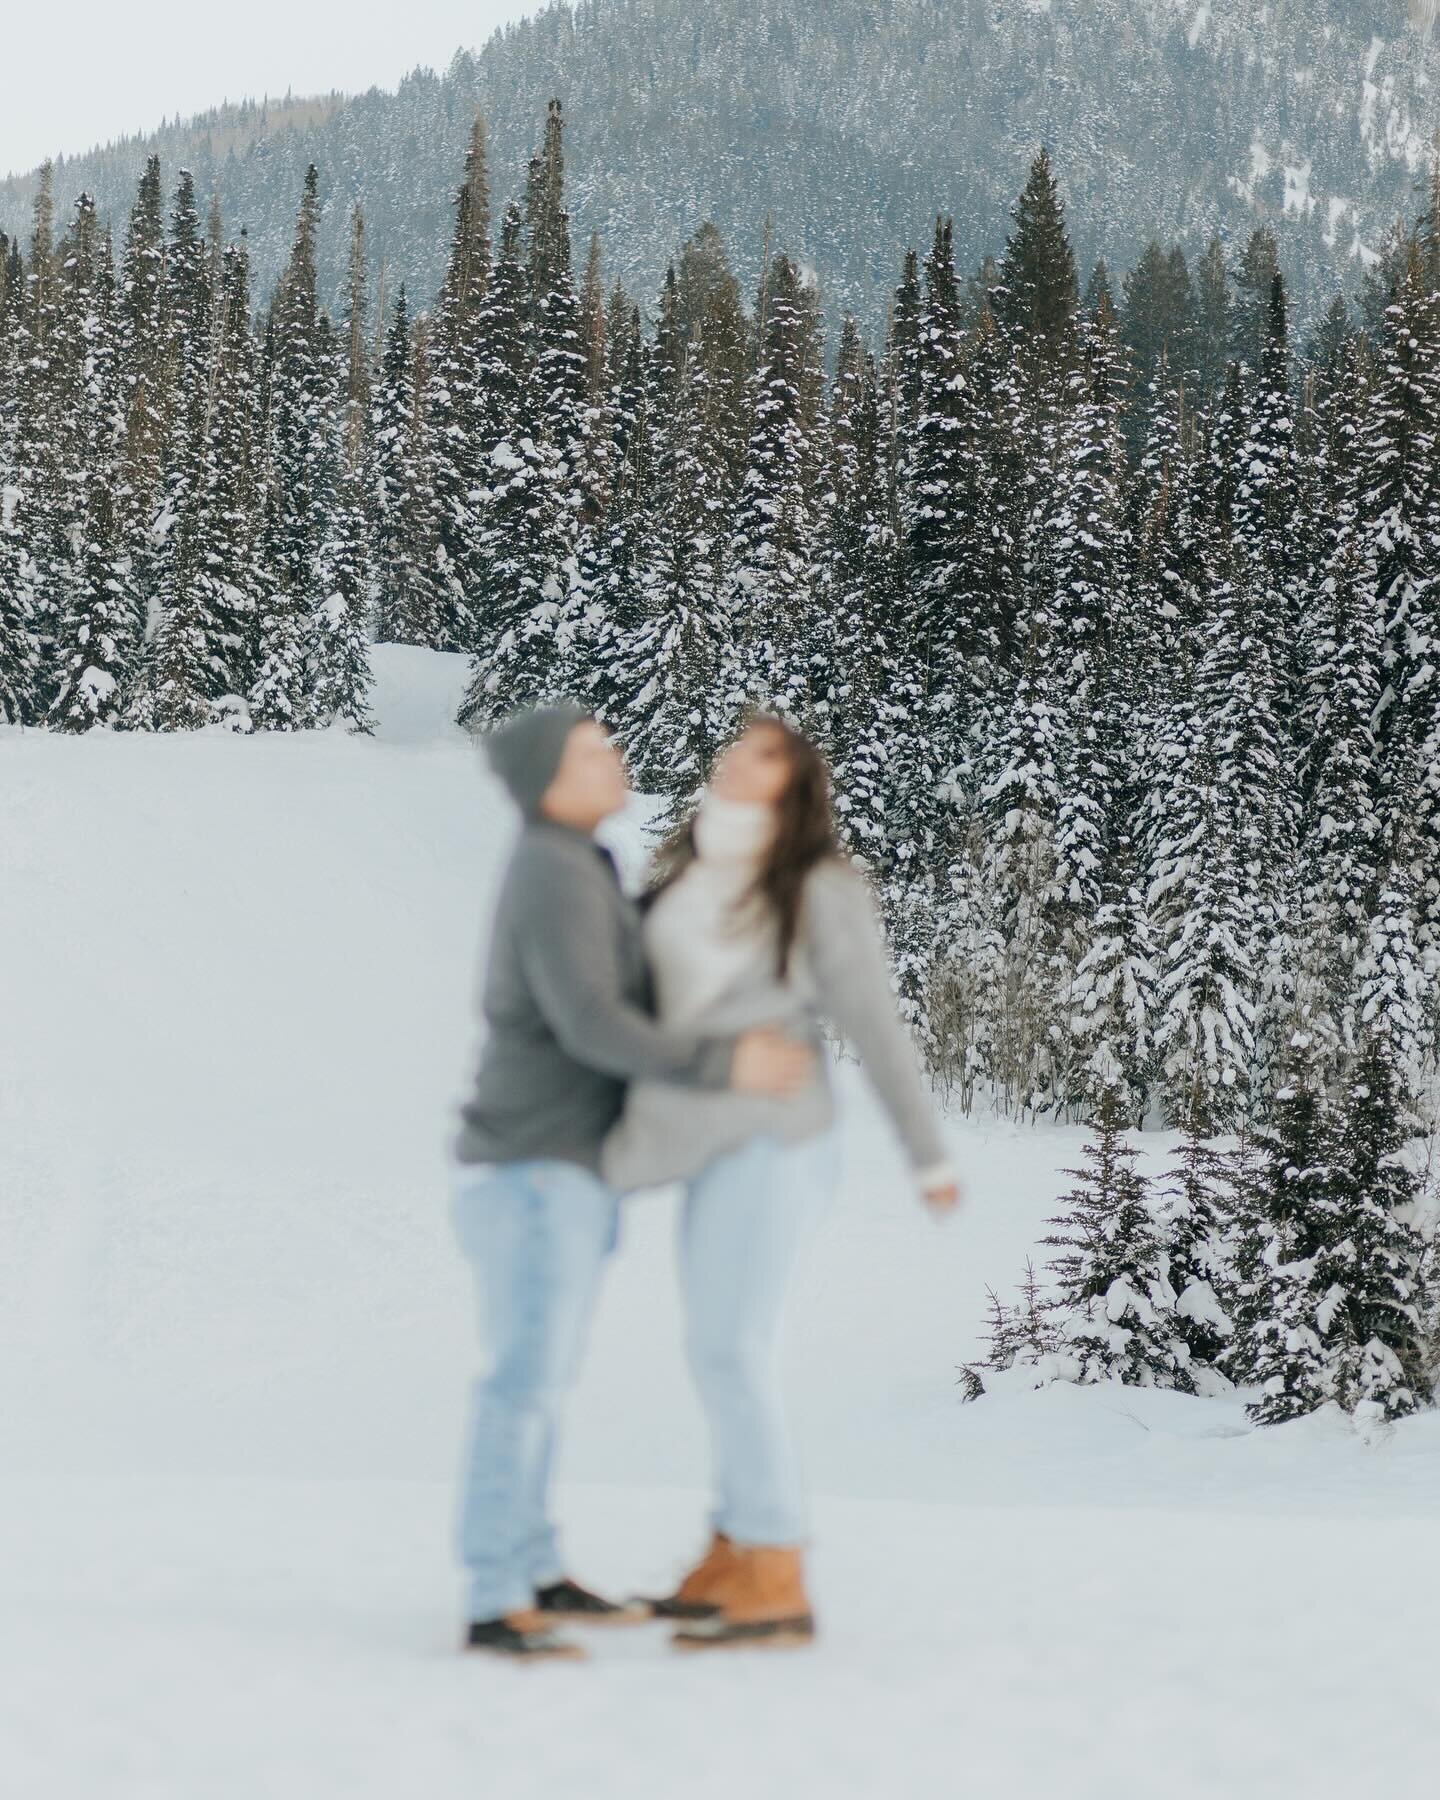 Throw back to a cute shoot in the snow ❄️ 
.
.
.
.
.
#slcweddingphotographer #utahengagements #draperphotographer #oremphotographer 
#parkcityphotographer #utahvalleyphotographer #southjordanphotographer #slcphotographer #saltlakecityphotographer #sa